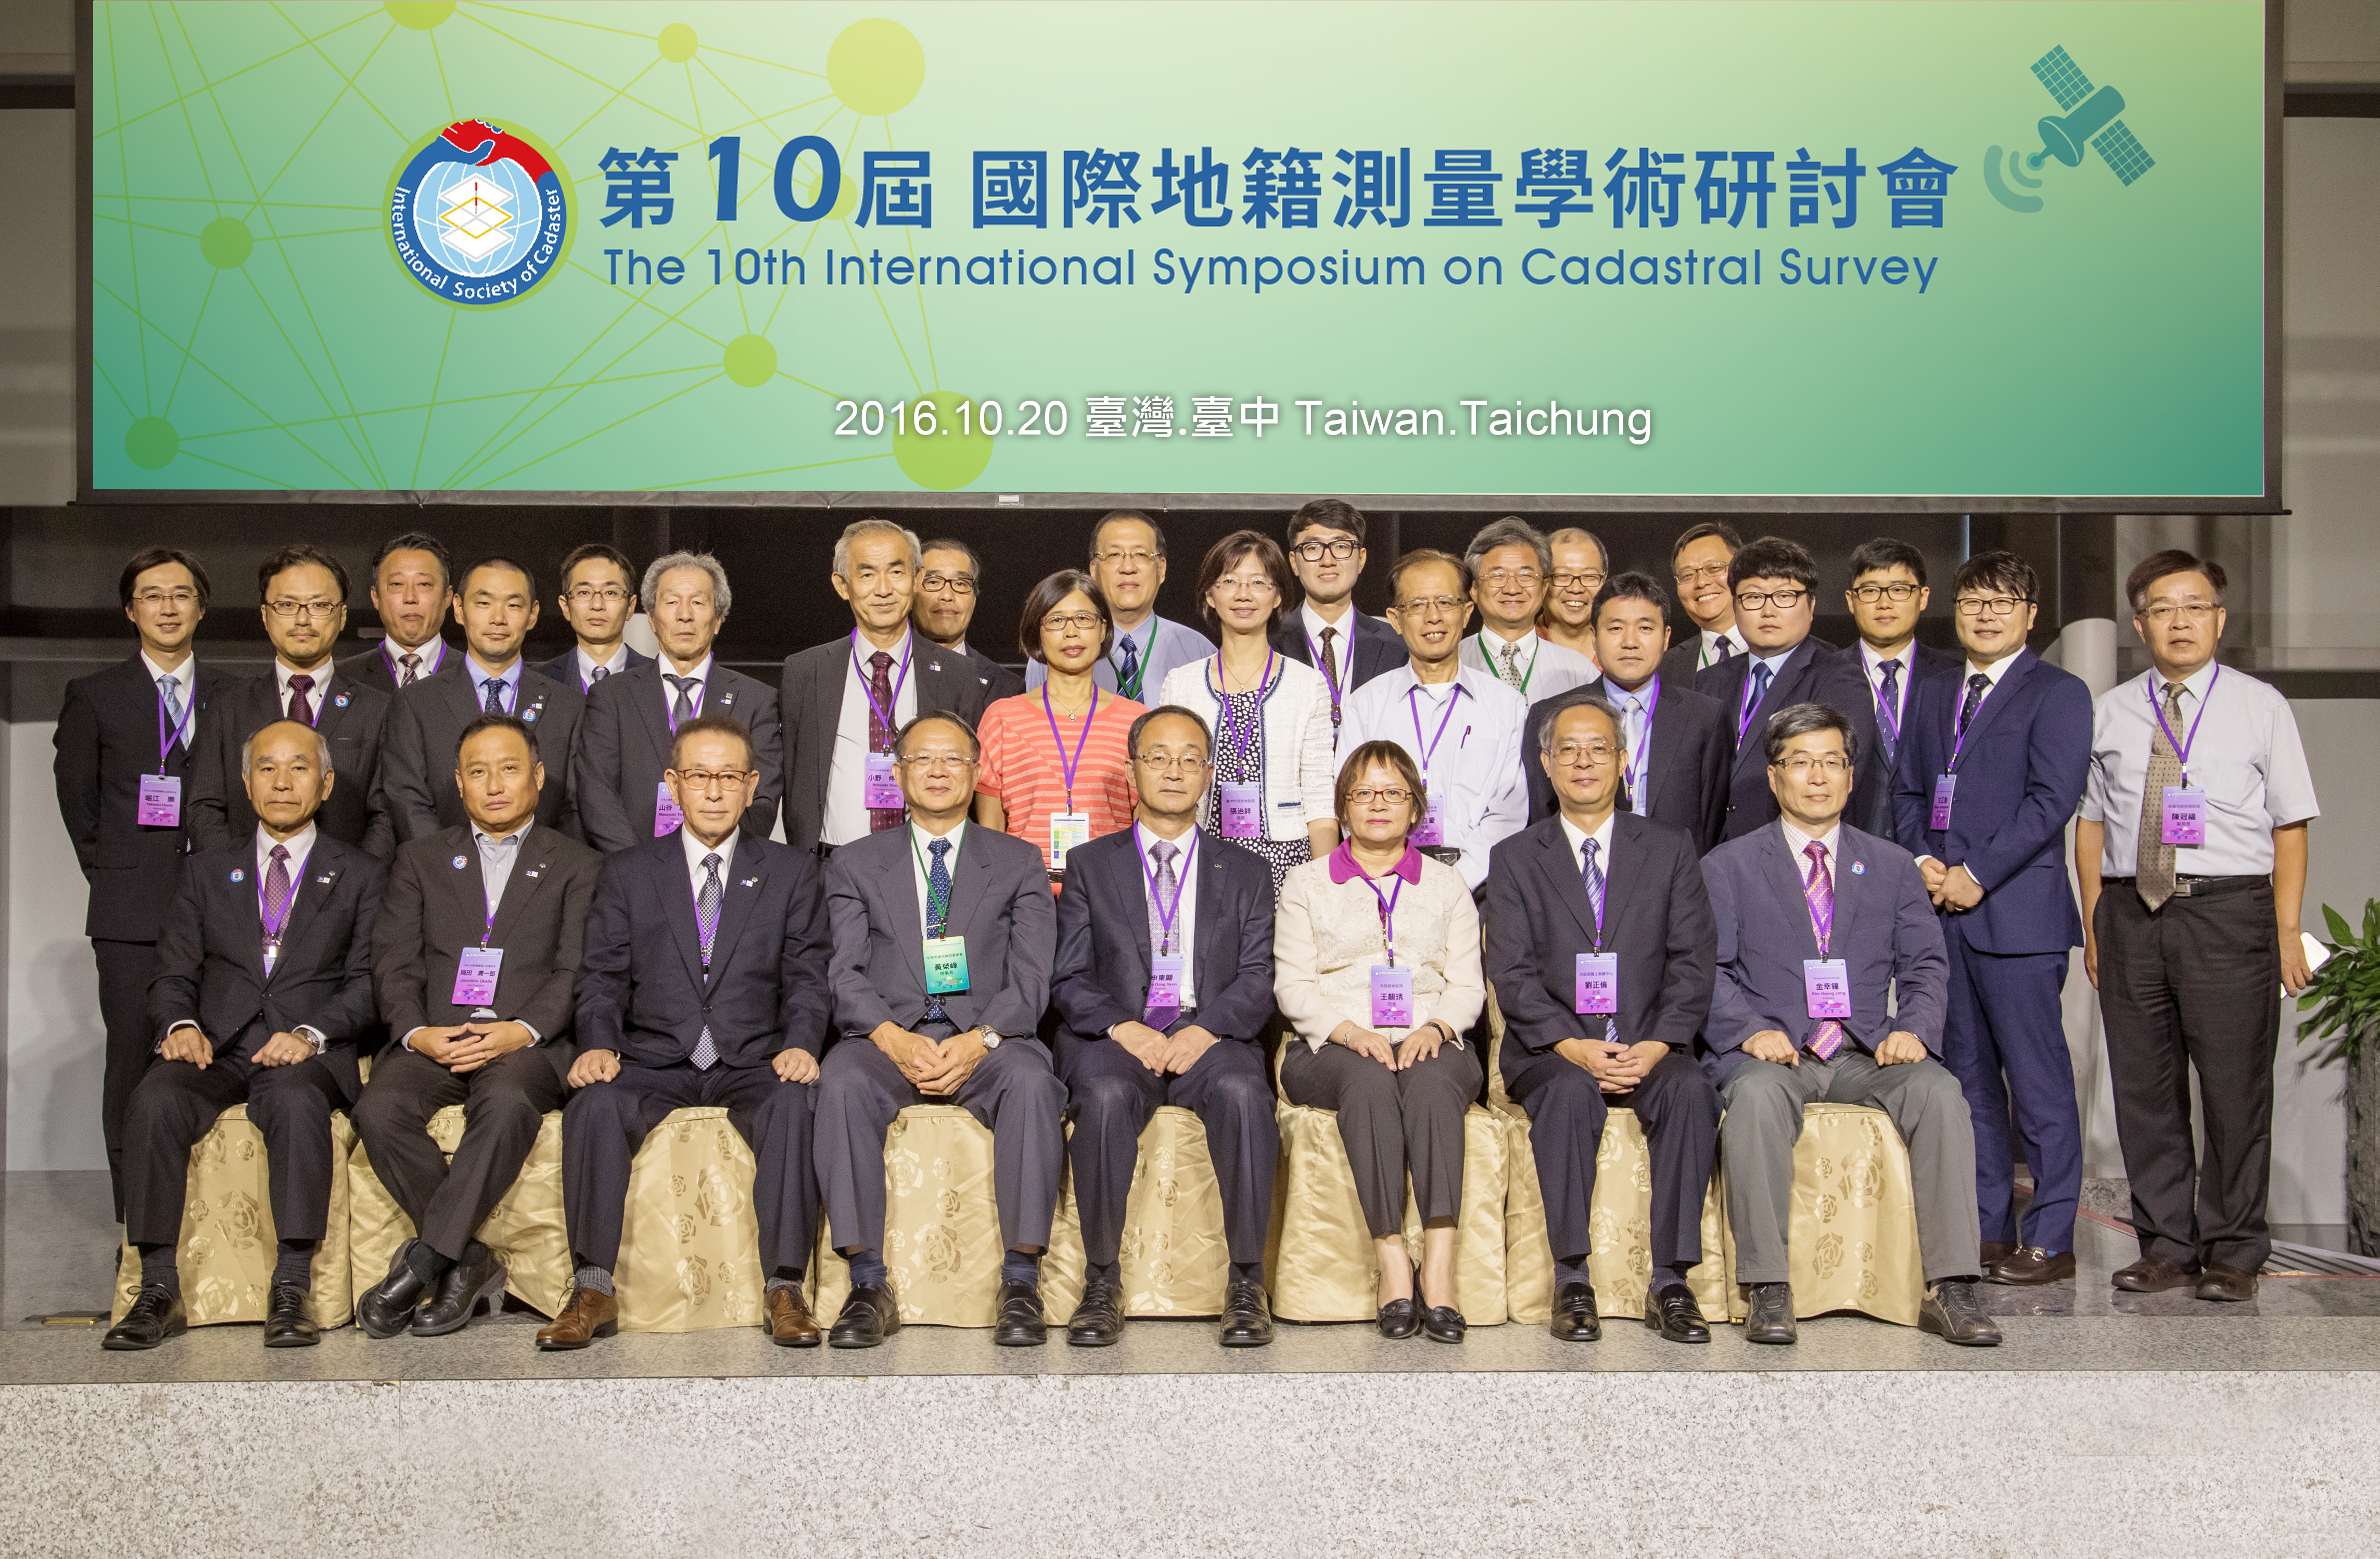 The 10th International Cadastral Symposium held in Taichung, Taiwan (October 20,2016) Circumstance